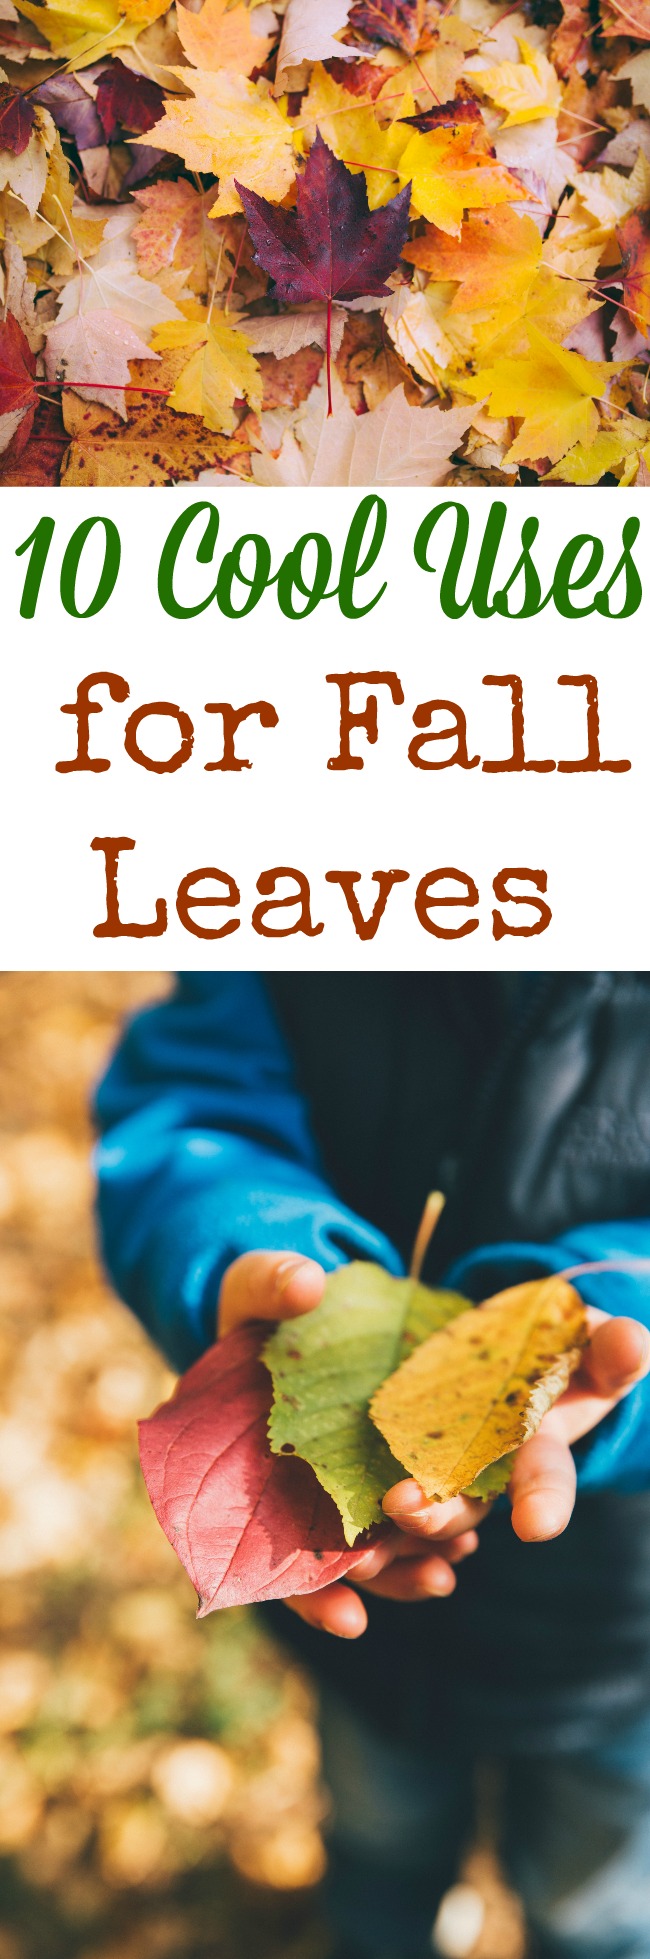 10 Cool Uses for Fall Leaves